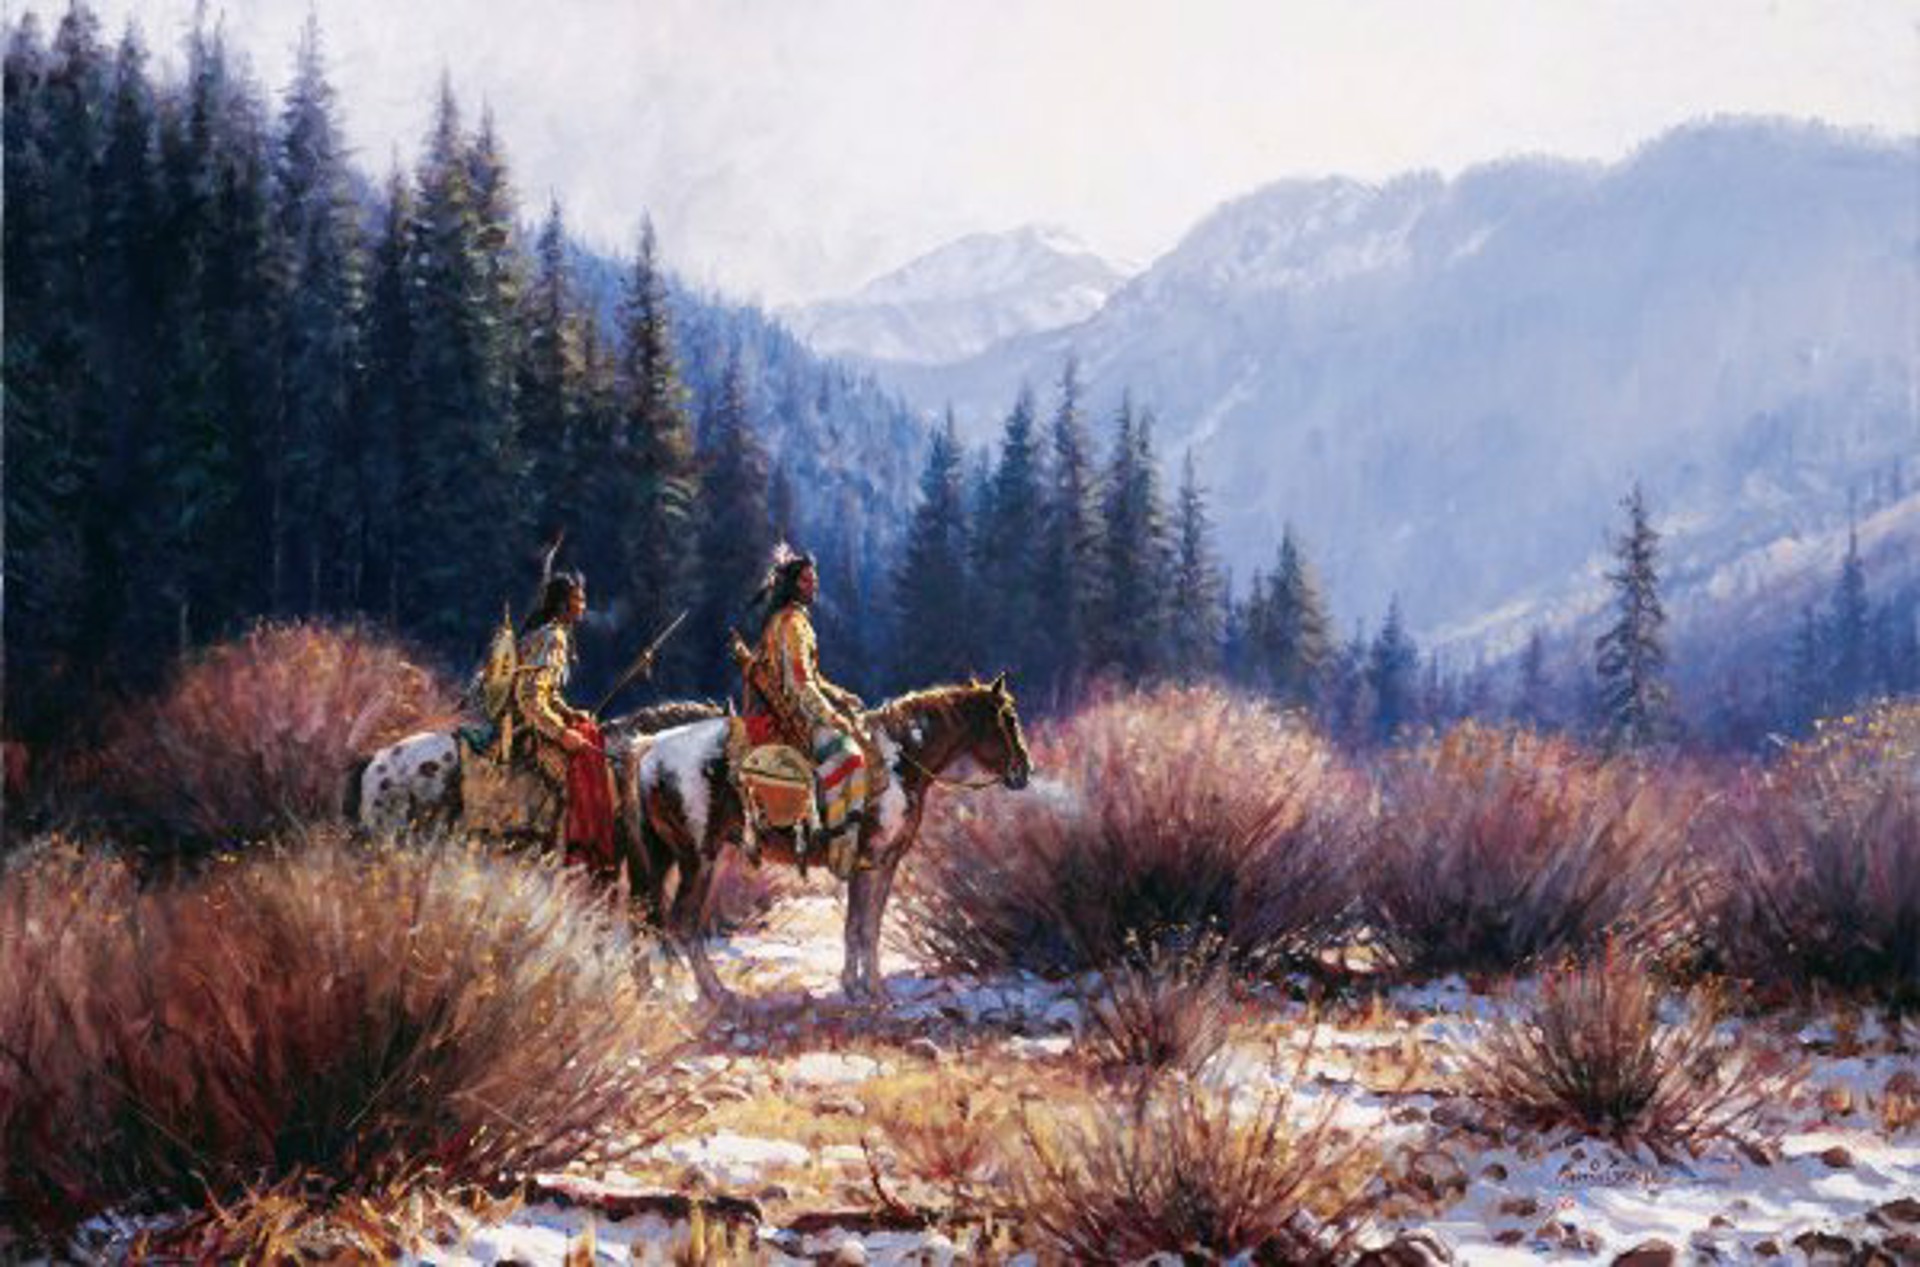 Warriors In The Willows by Martin Grelle